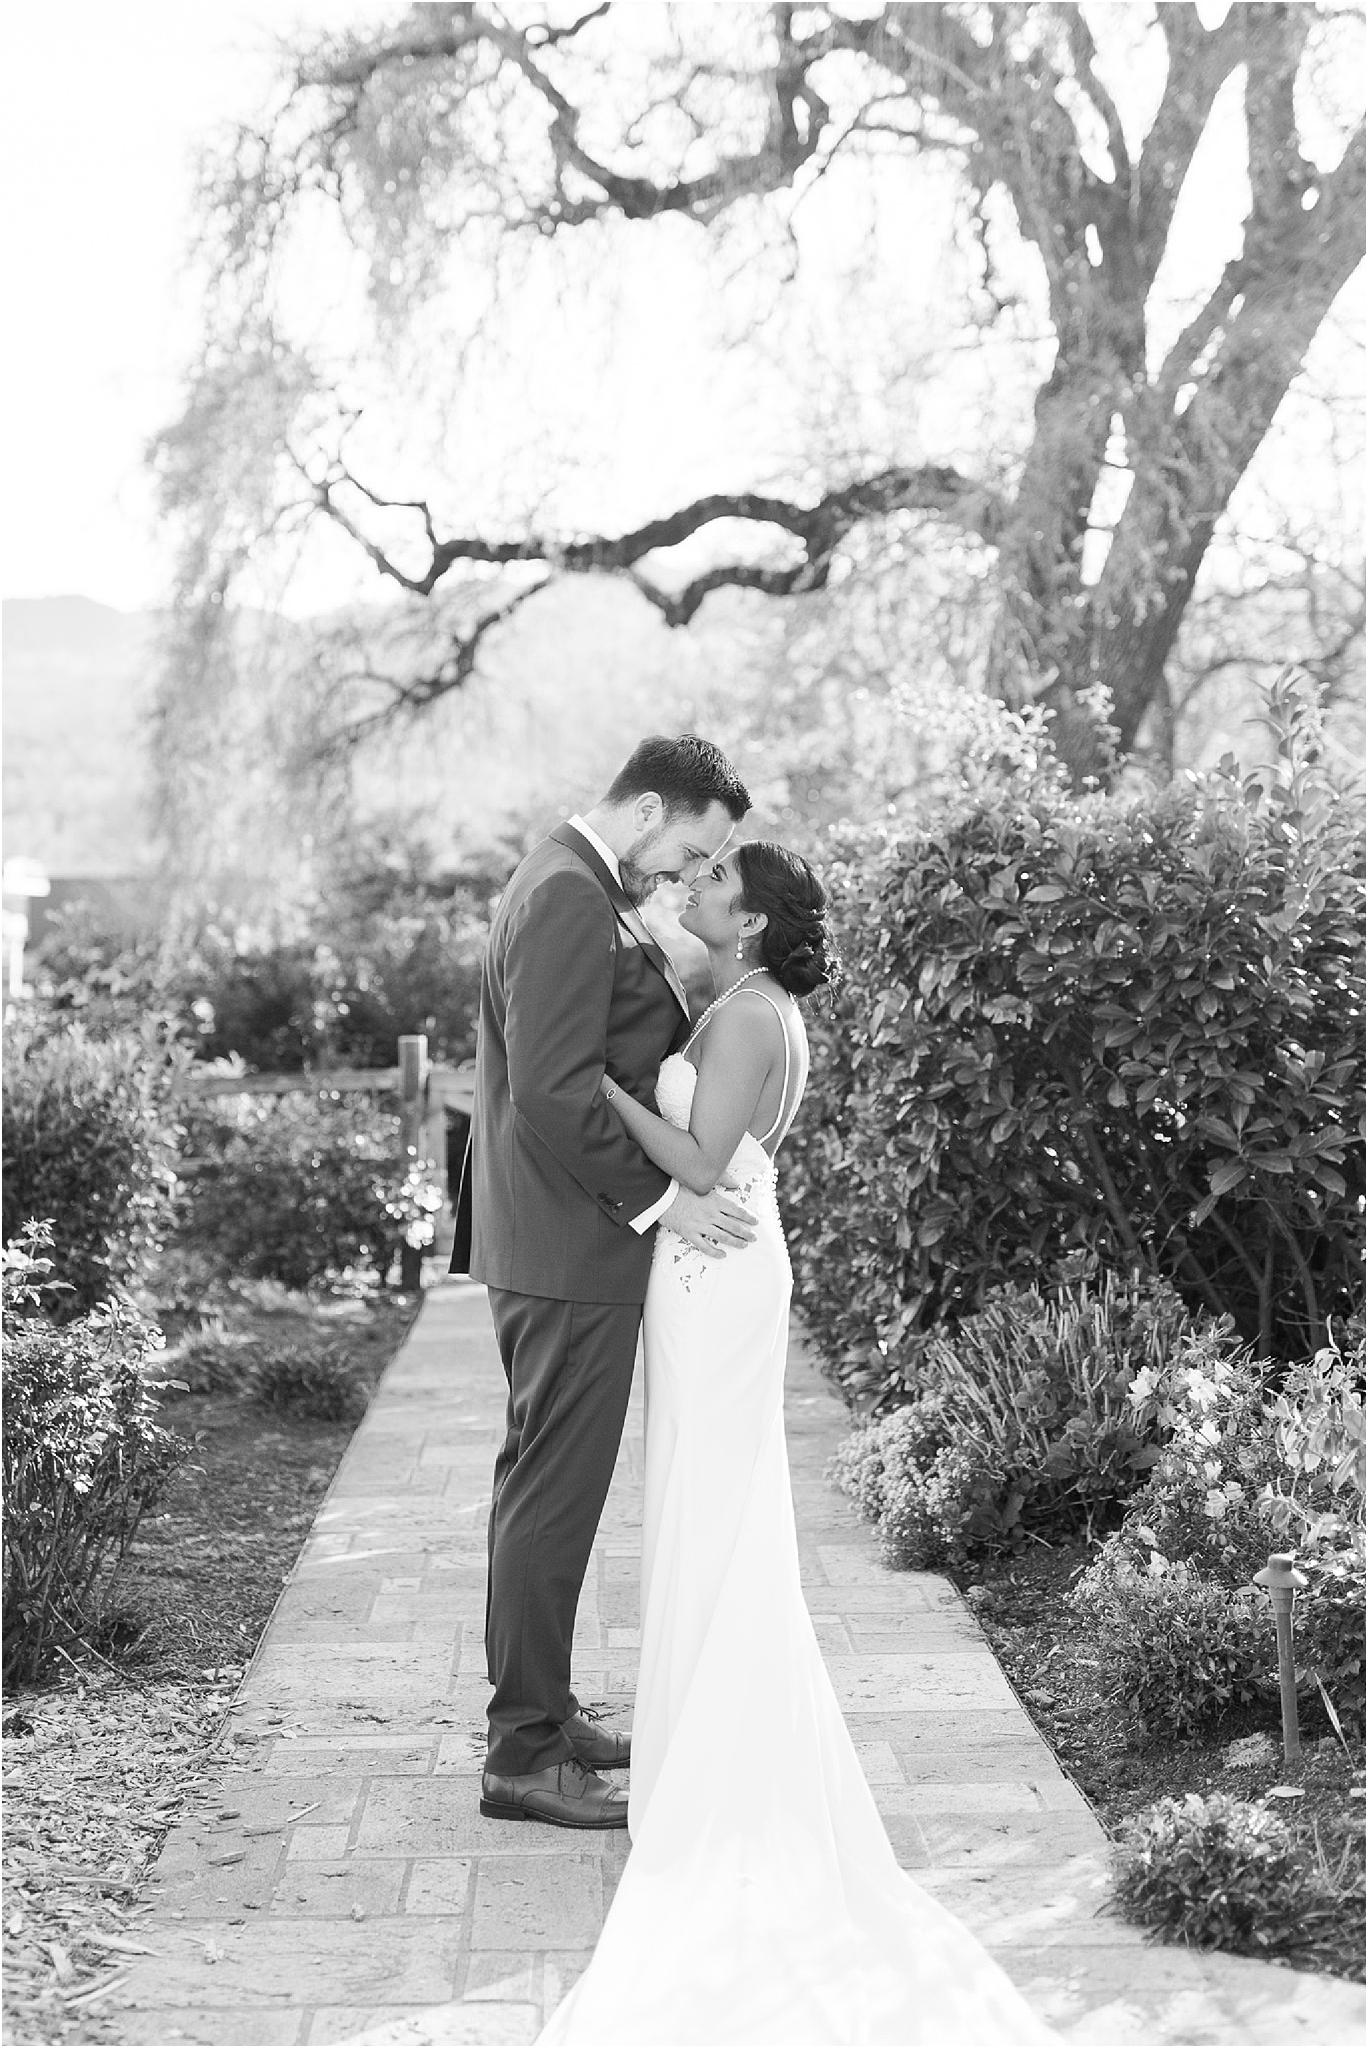 V. Sattui Winery Wedding | Napa Valley, CA | Annie and Pablo bride and groom photos | Napa Valley Wedding Photographer | West End Photography